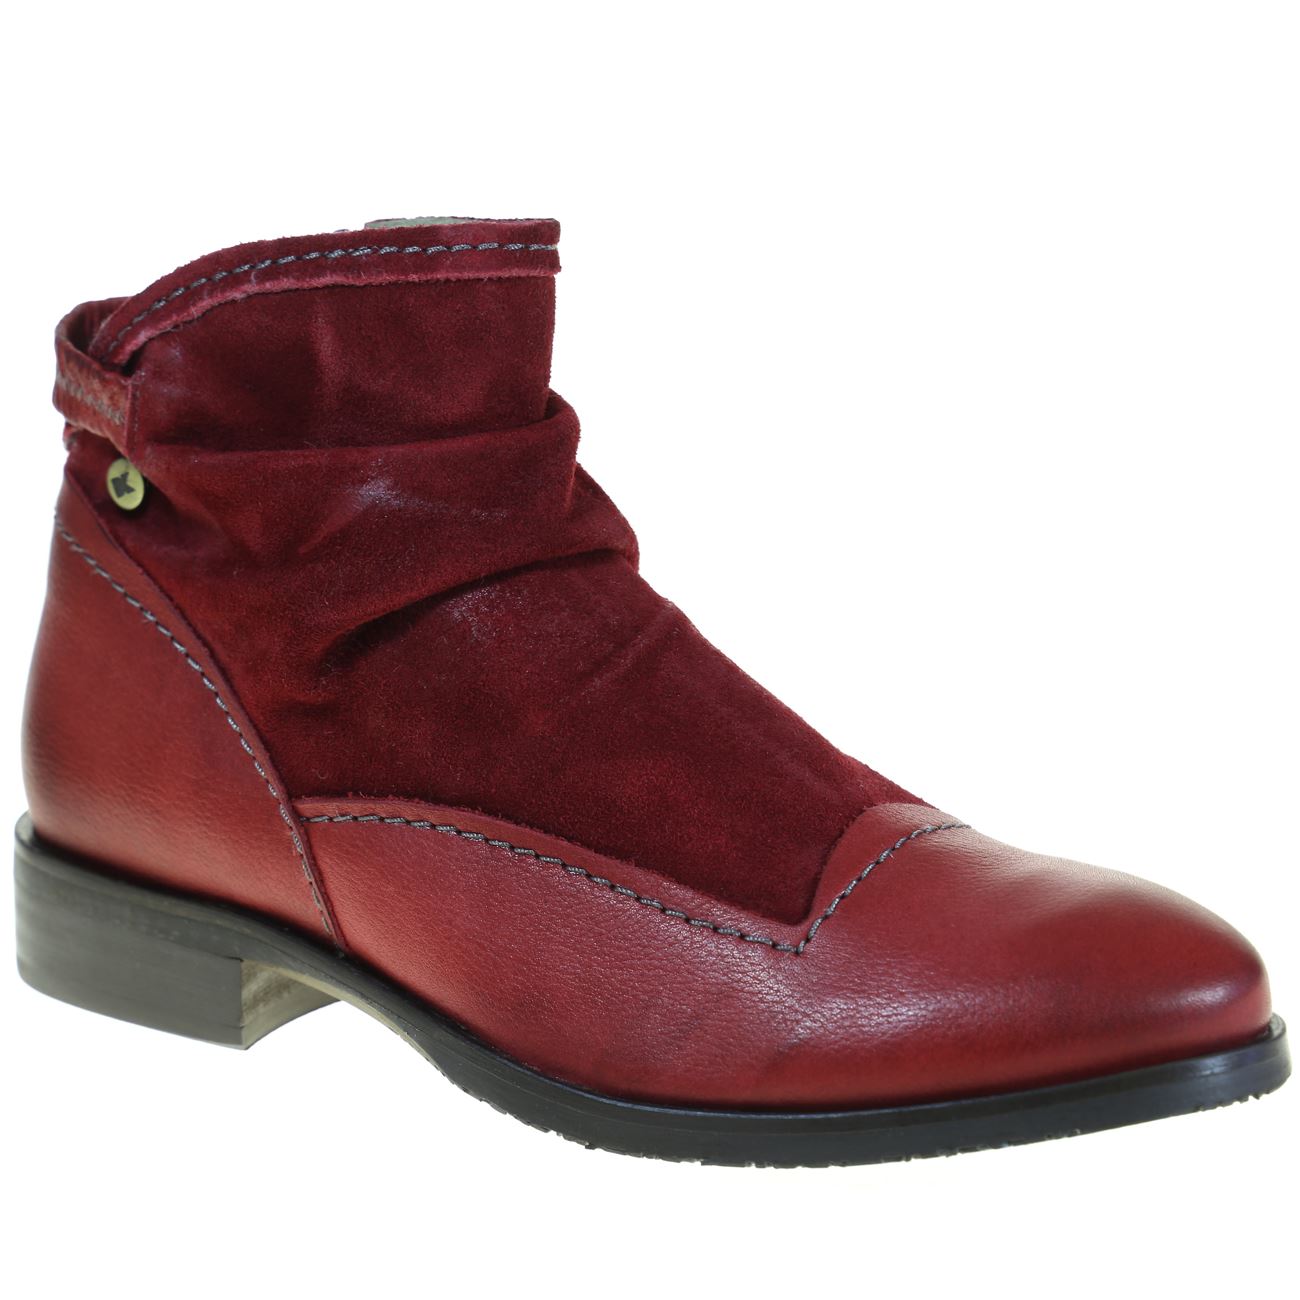 Dkode, DKW18-Hyria, Boots, Leather, Red Boots Dkode Red 36 